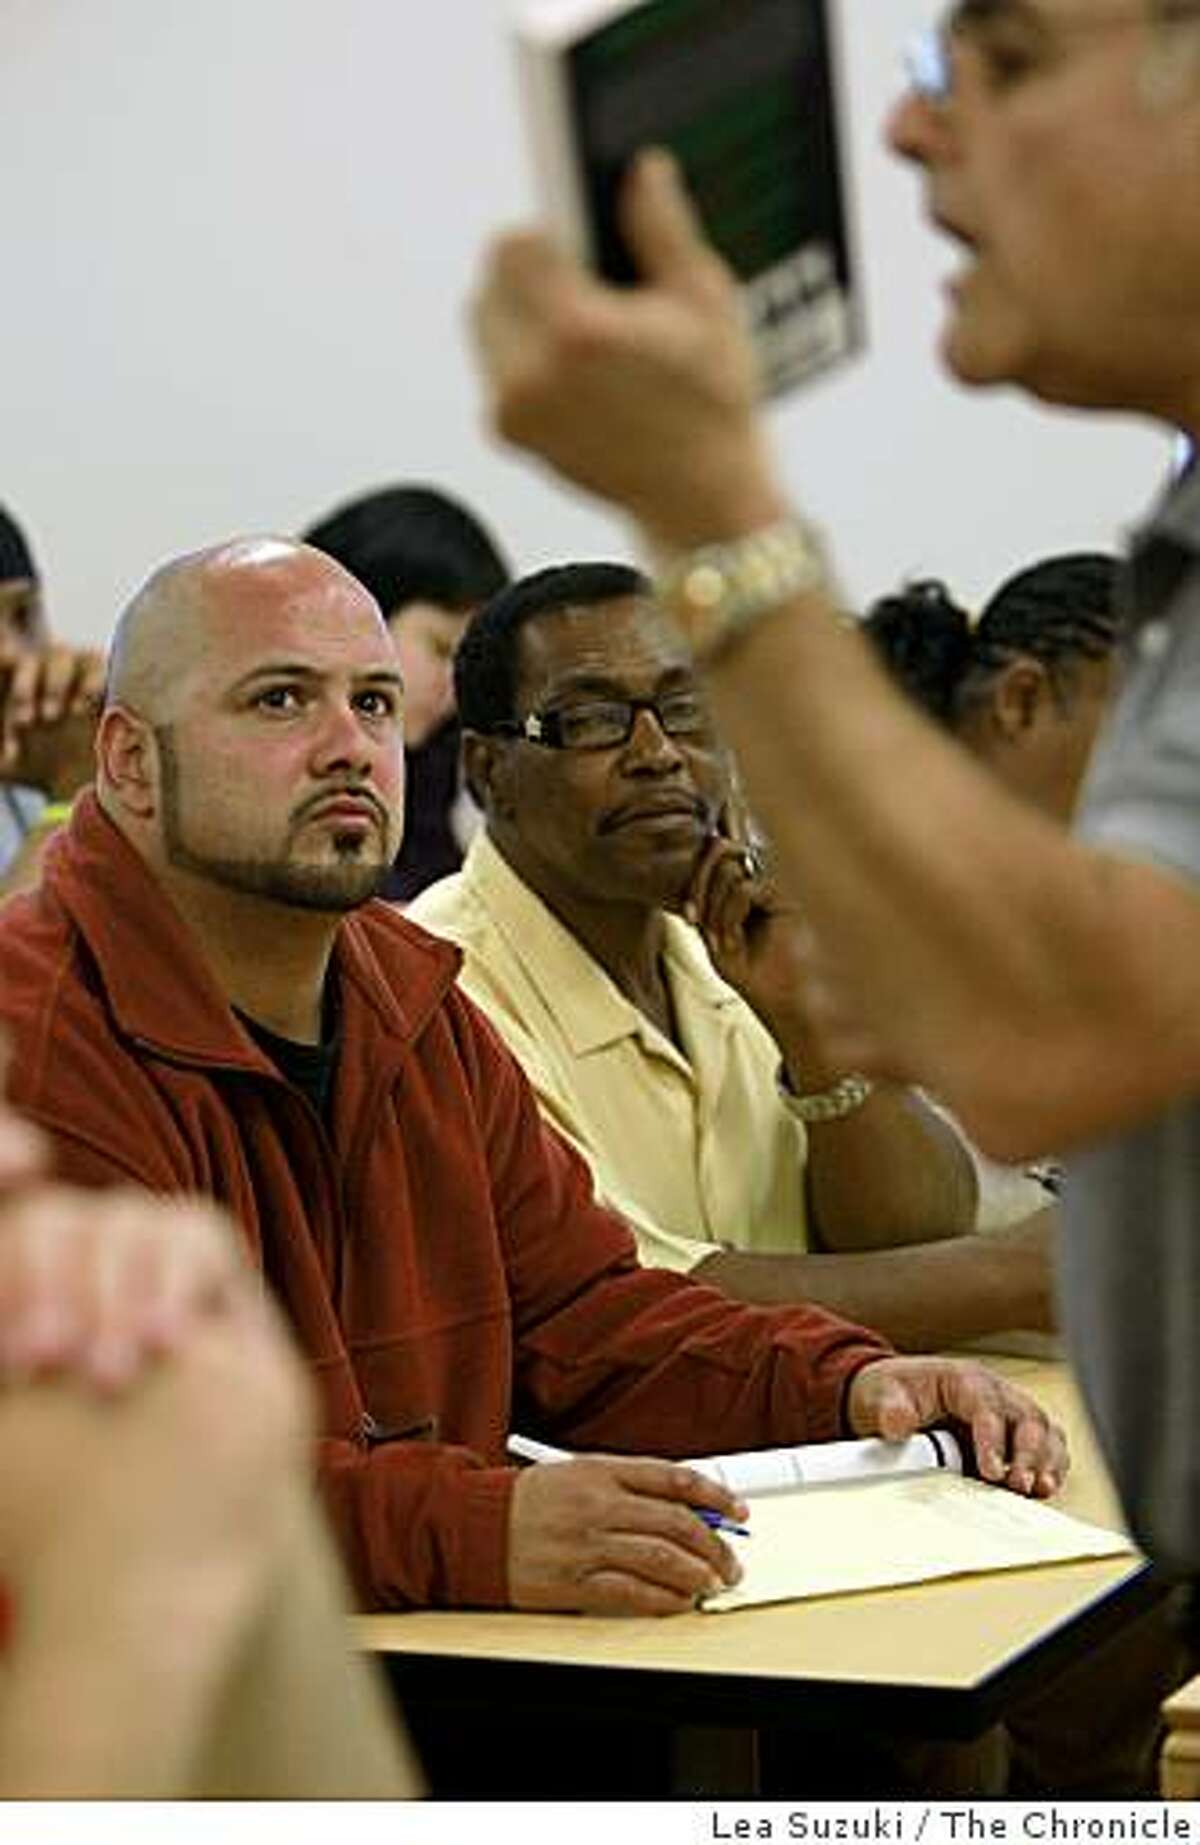 Alex Humphrey (in red jacket) and Eli Crawford (in yellow shirt) listen to Professor Frederick Chavaria, Department Chair Administration of Justice and Fire Science Technology, lecture during class at the City College Mission Campus in San Francisco, Calif. on Tuesday, June 16, 2009.